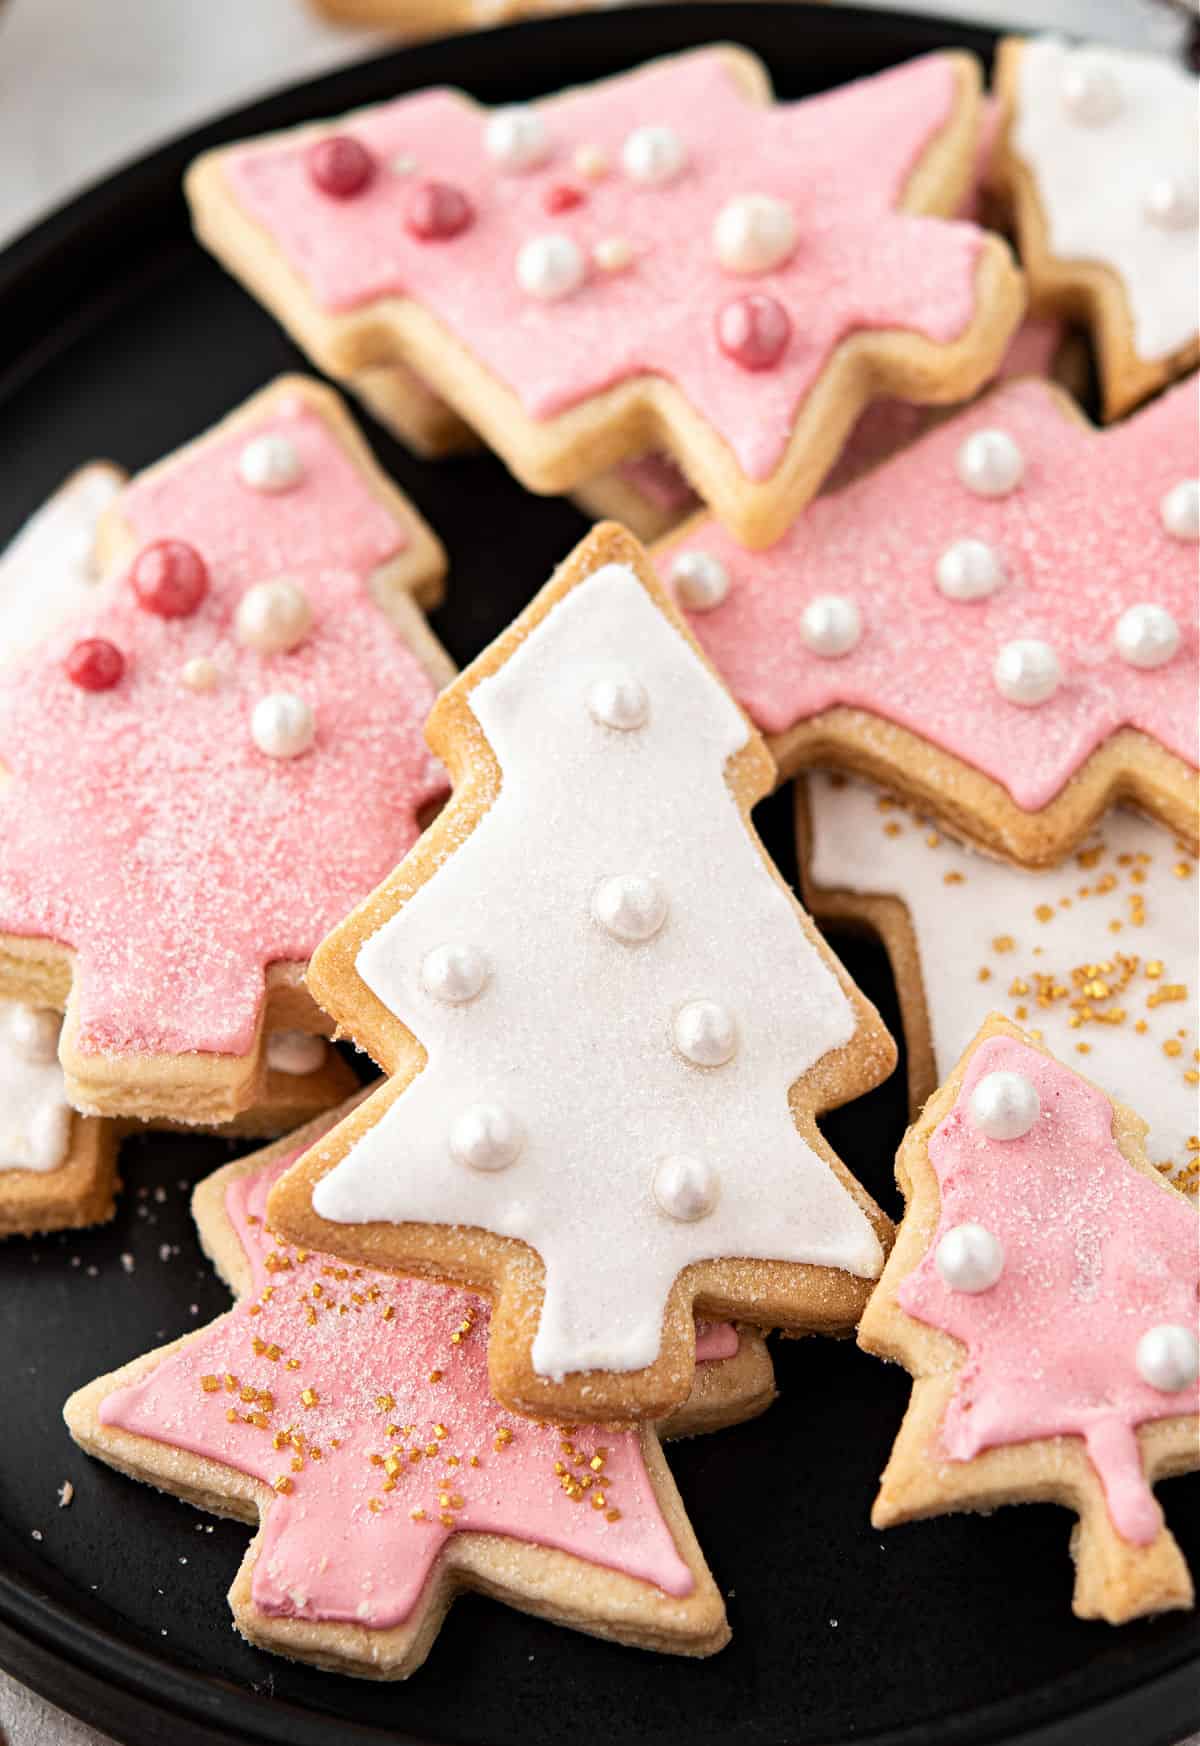 Pink and white Christmas tree shaped sugar cookies on a black plate.